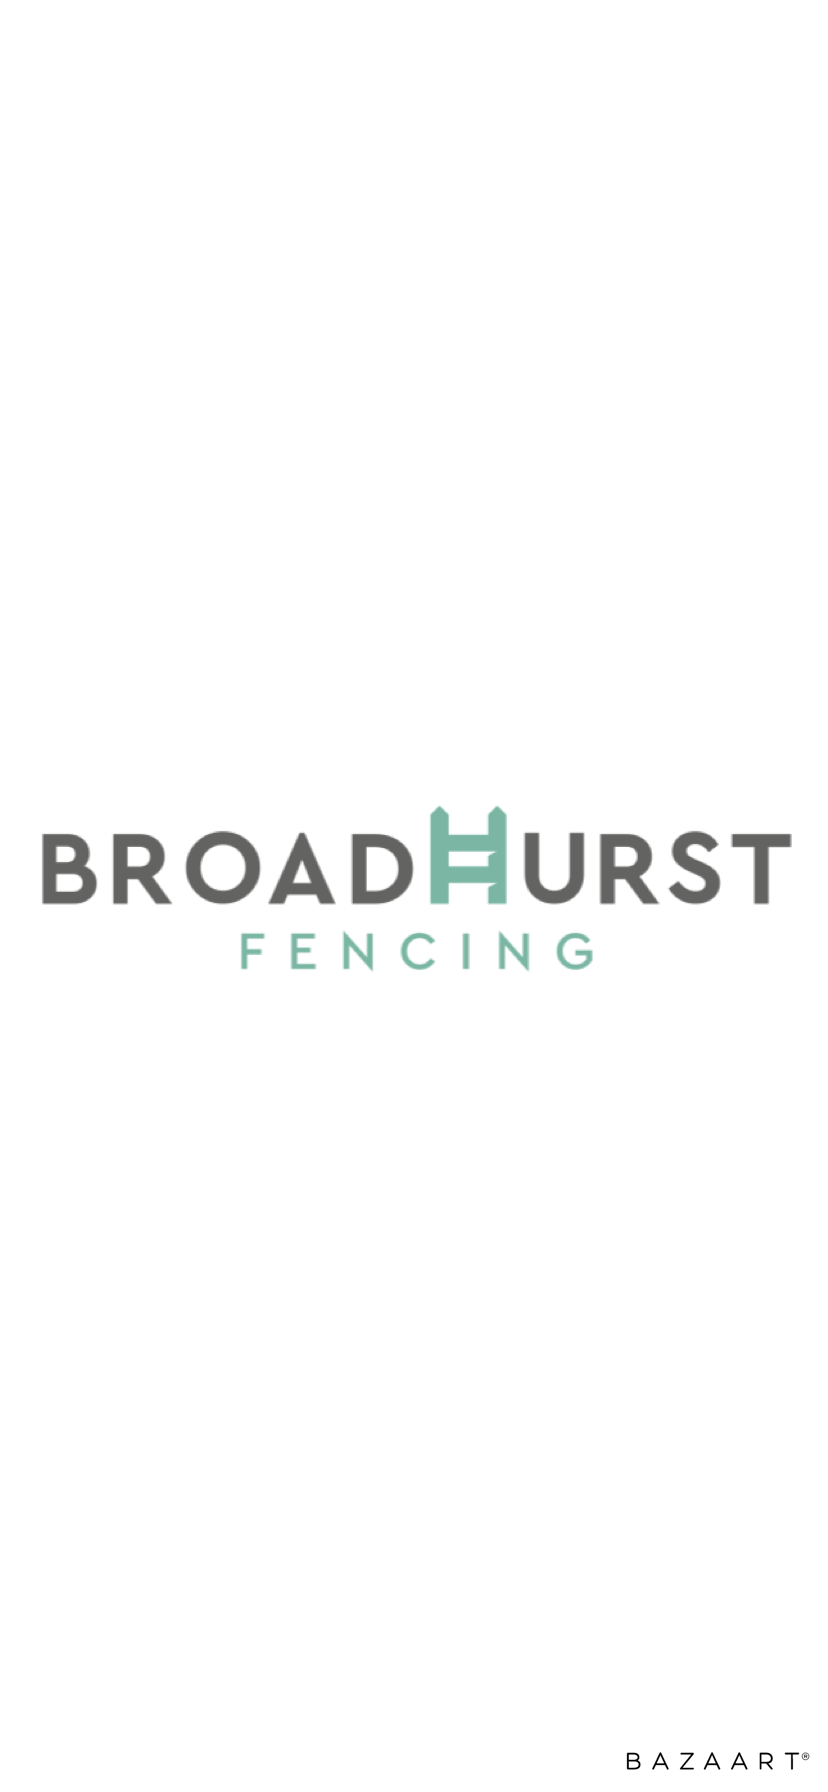 Main photo for Broadhurst Fencing